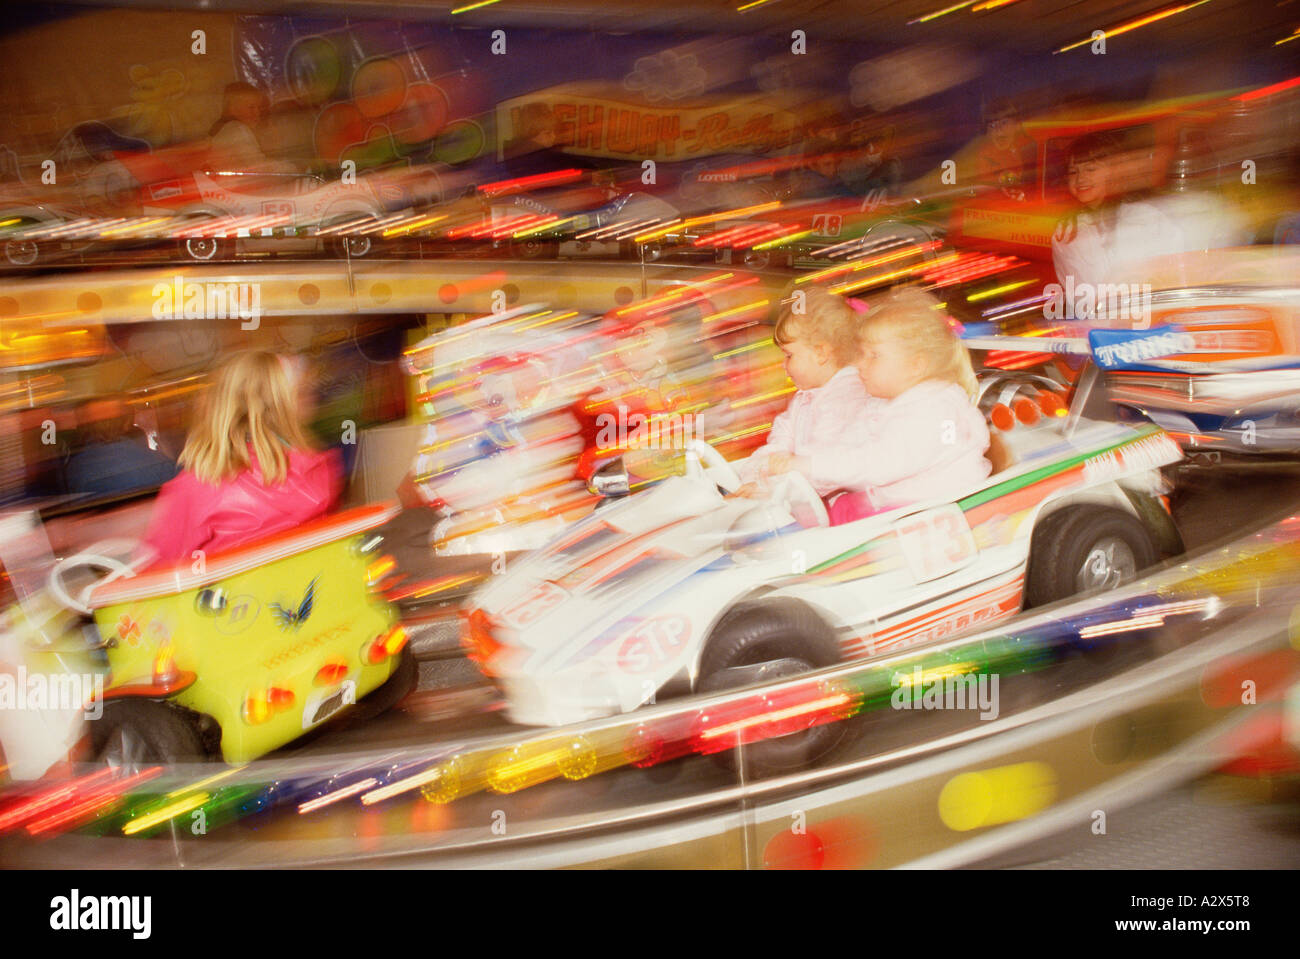 Children in cars of funfair roundabout ride. Stock Photo